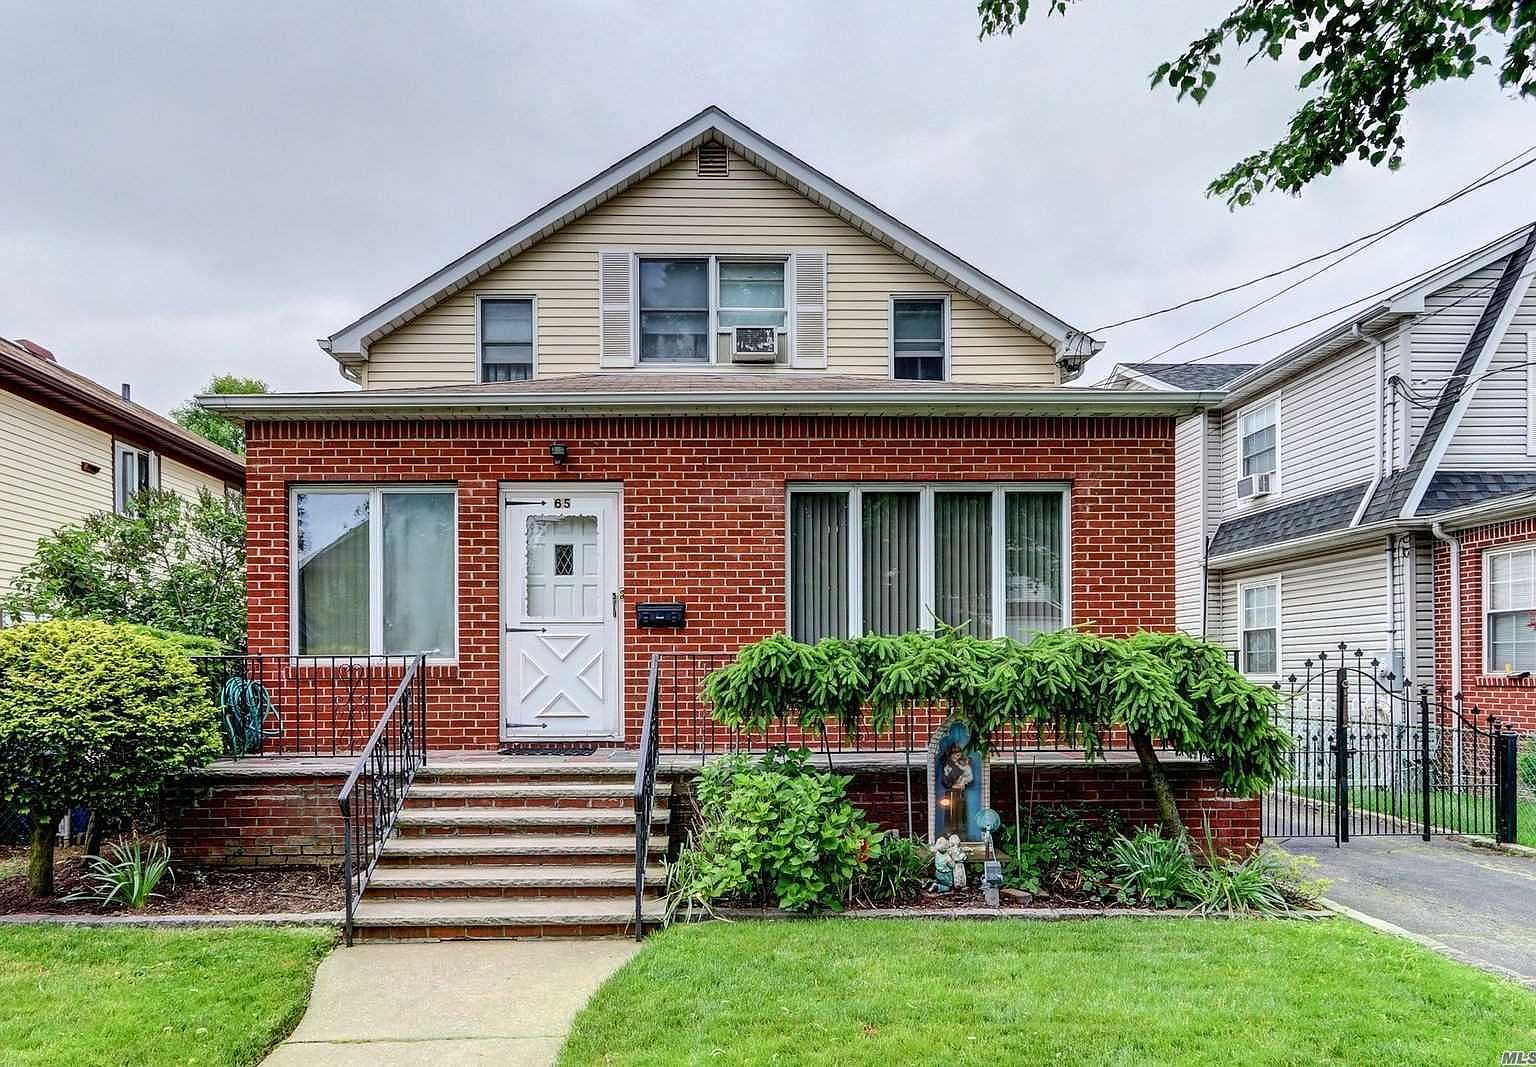 43 Ash St Floral Park Ny 11001 Zillow